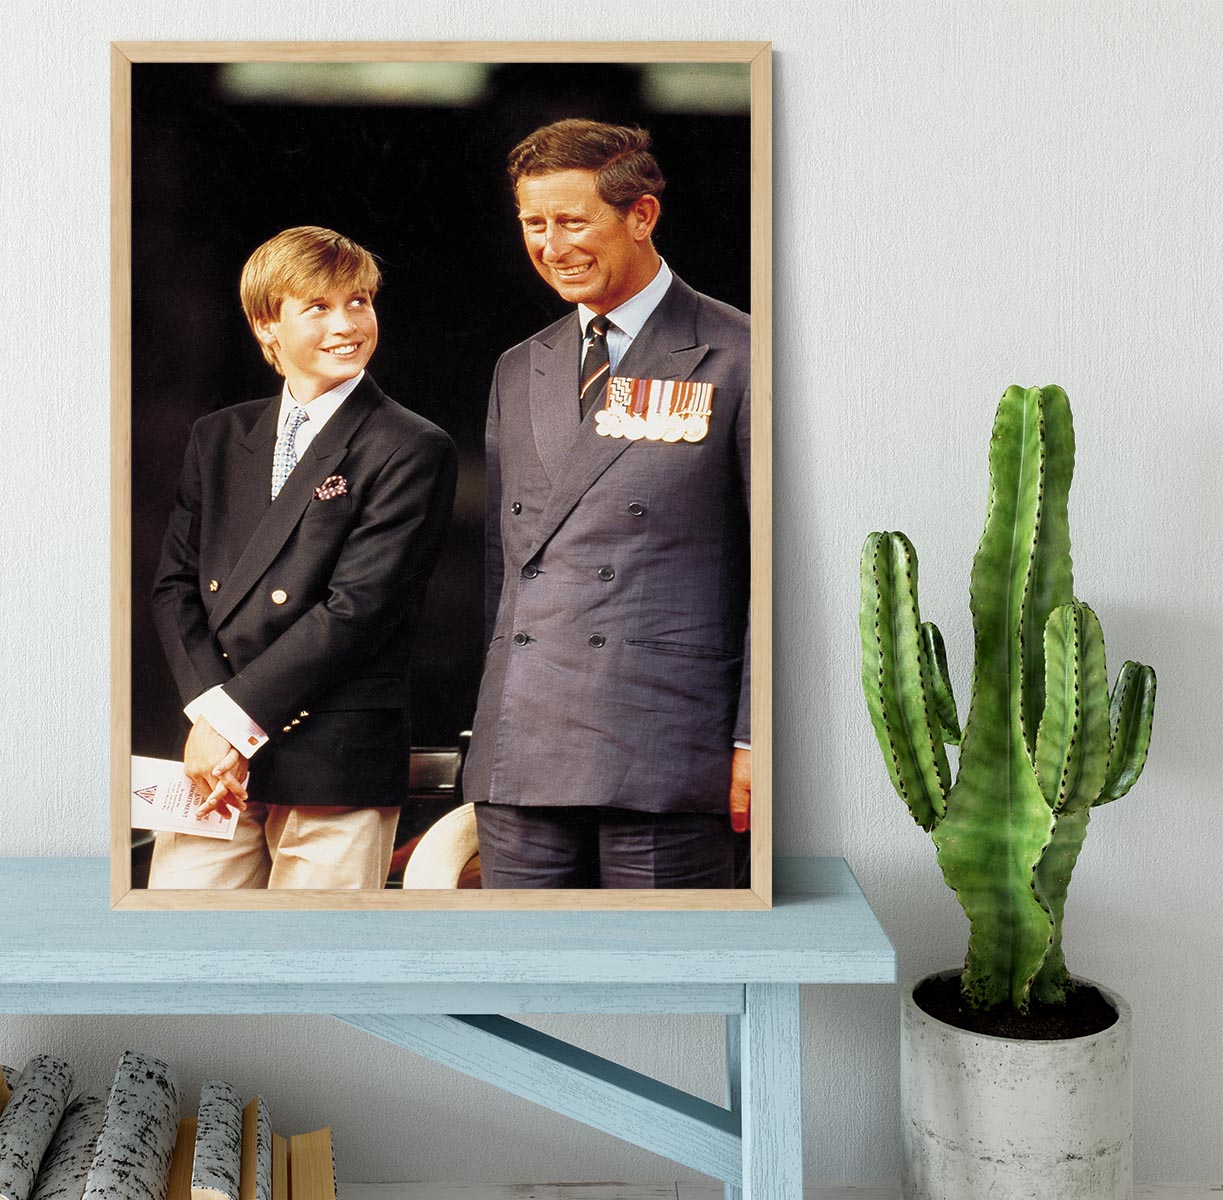 Prince William with Prince Charles at a VJ Parade Framed Print - Canvas Art Rocks - 4